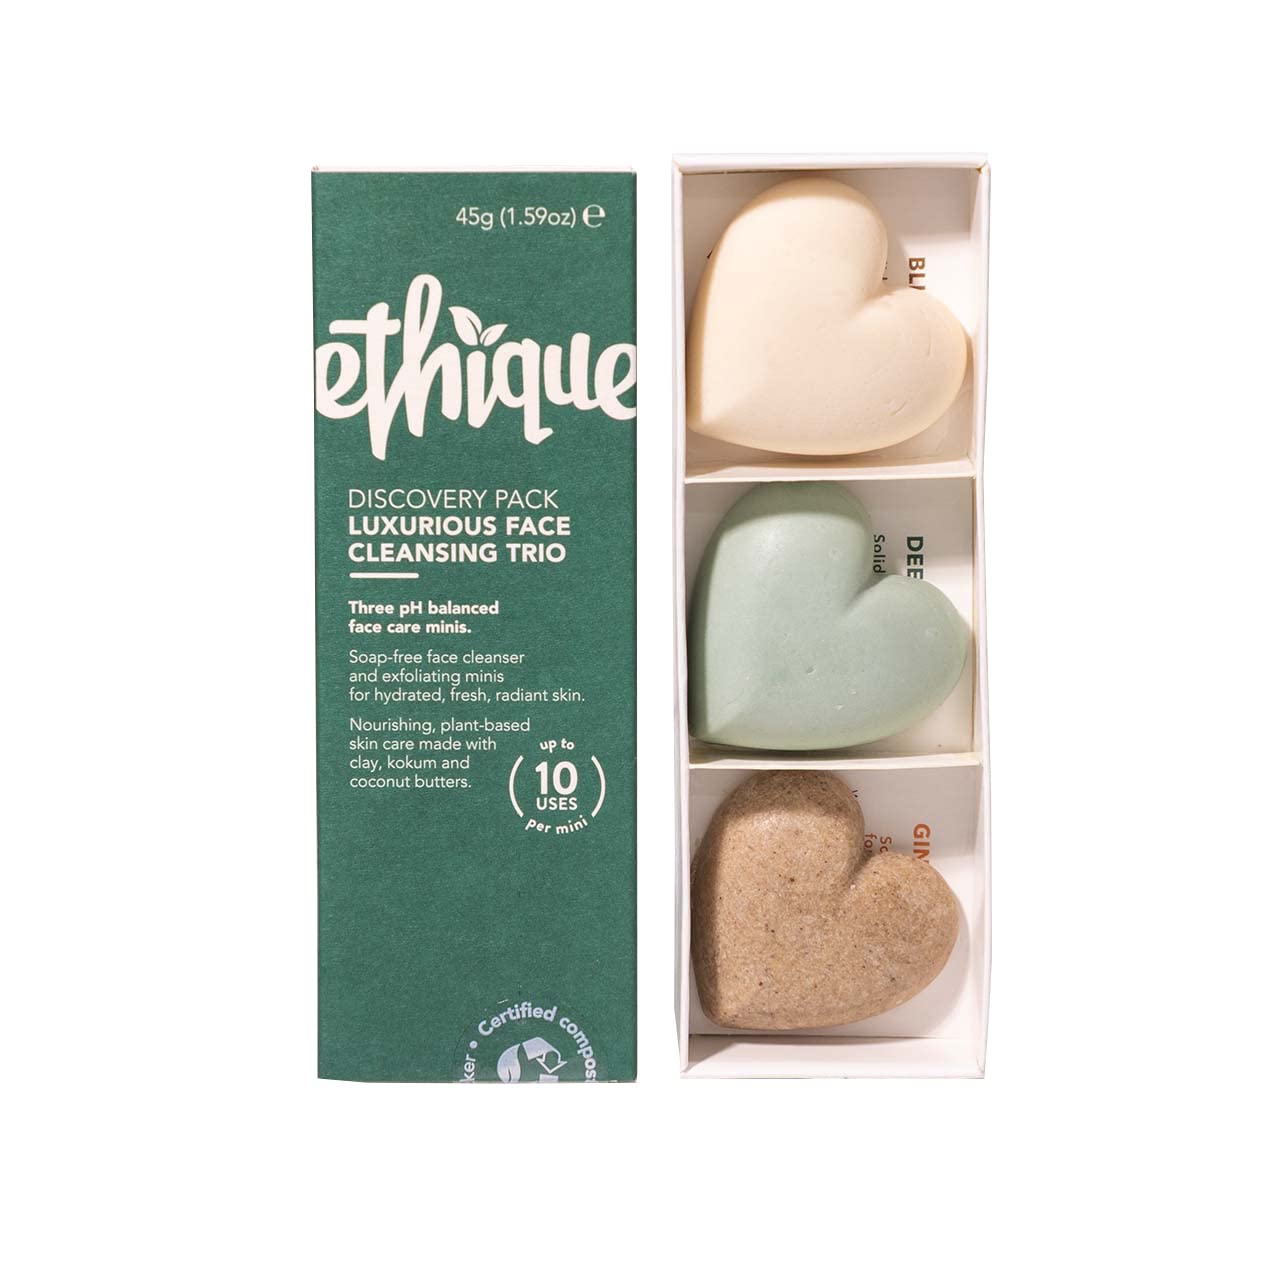 Ethique Luxurious Face Cleansing Trio Discovery Pack - Cleanser & Scrub - Plastic-Free, Vegan, Cruelty-Free, Eco-Friendly, 3 Travel Bars 1.59 oz (Pack of 1)